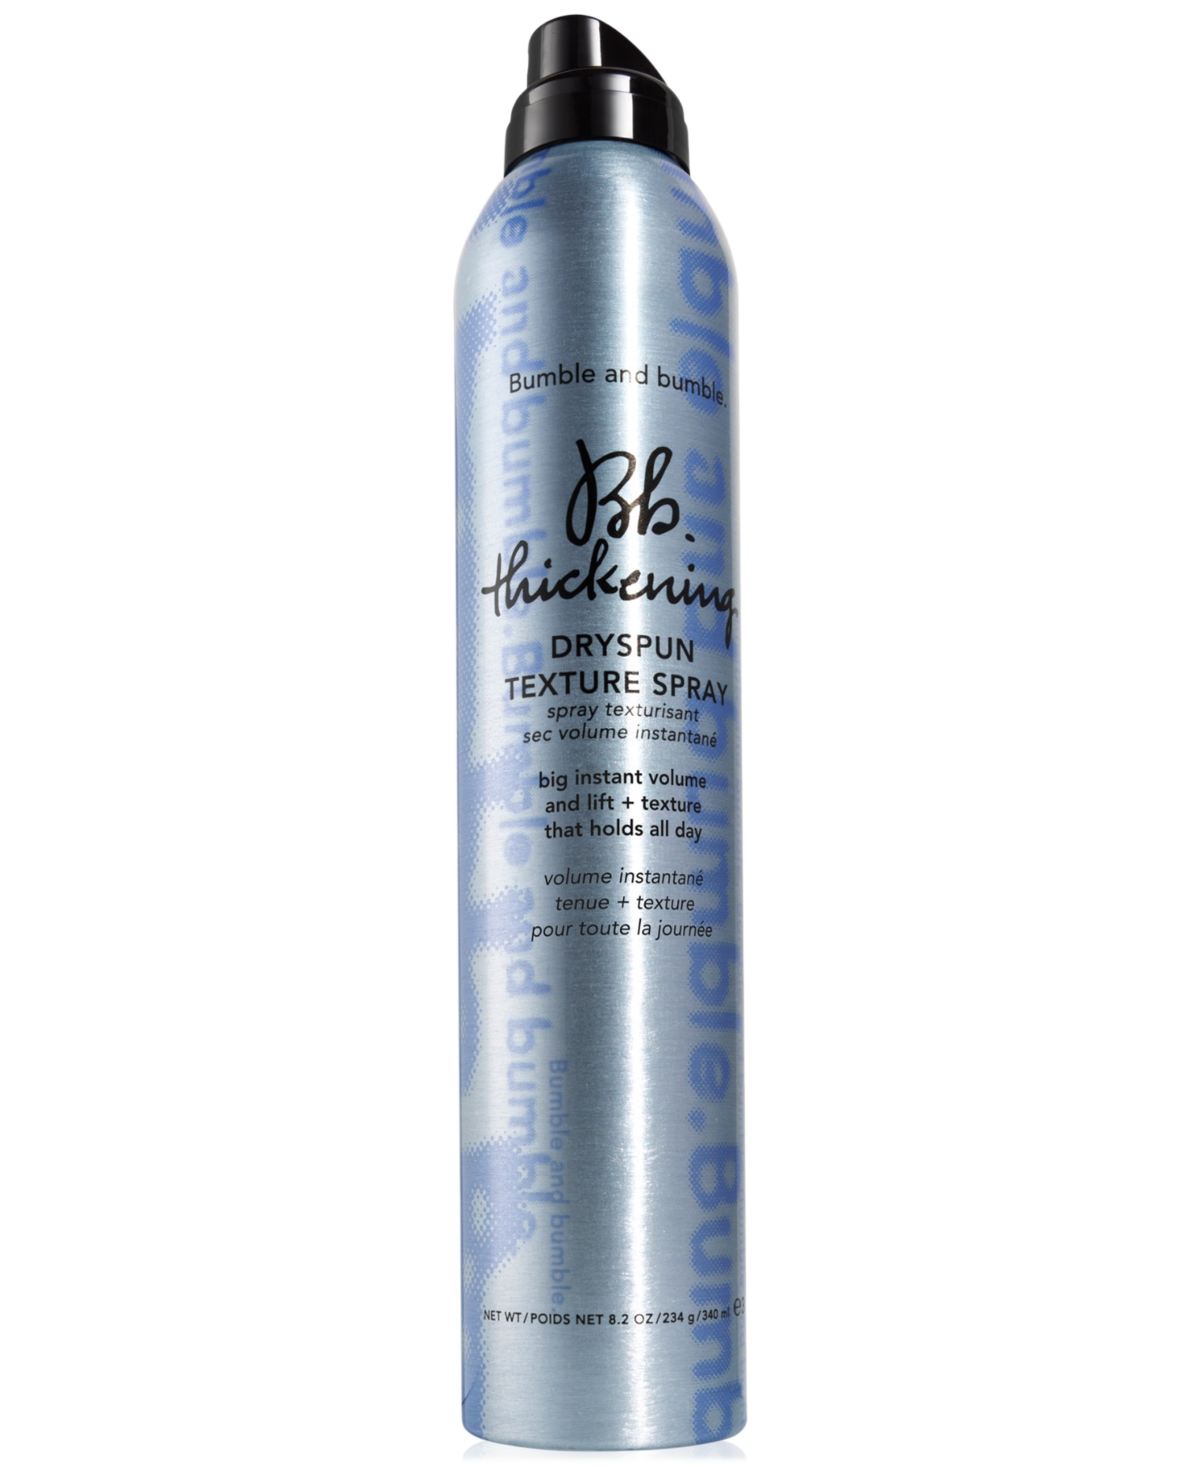 Bumble And Bumble Thickening Dryspun Texture Spray, 8.2 Oz. In No Color